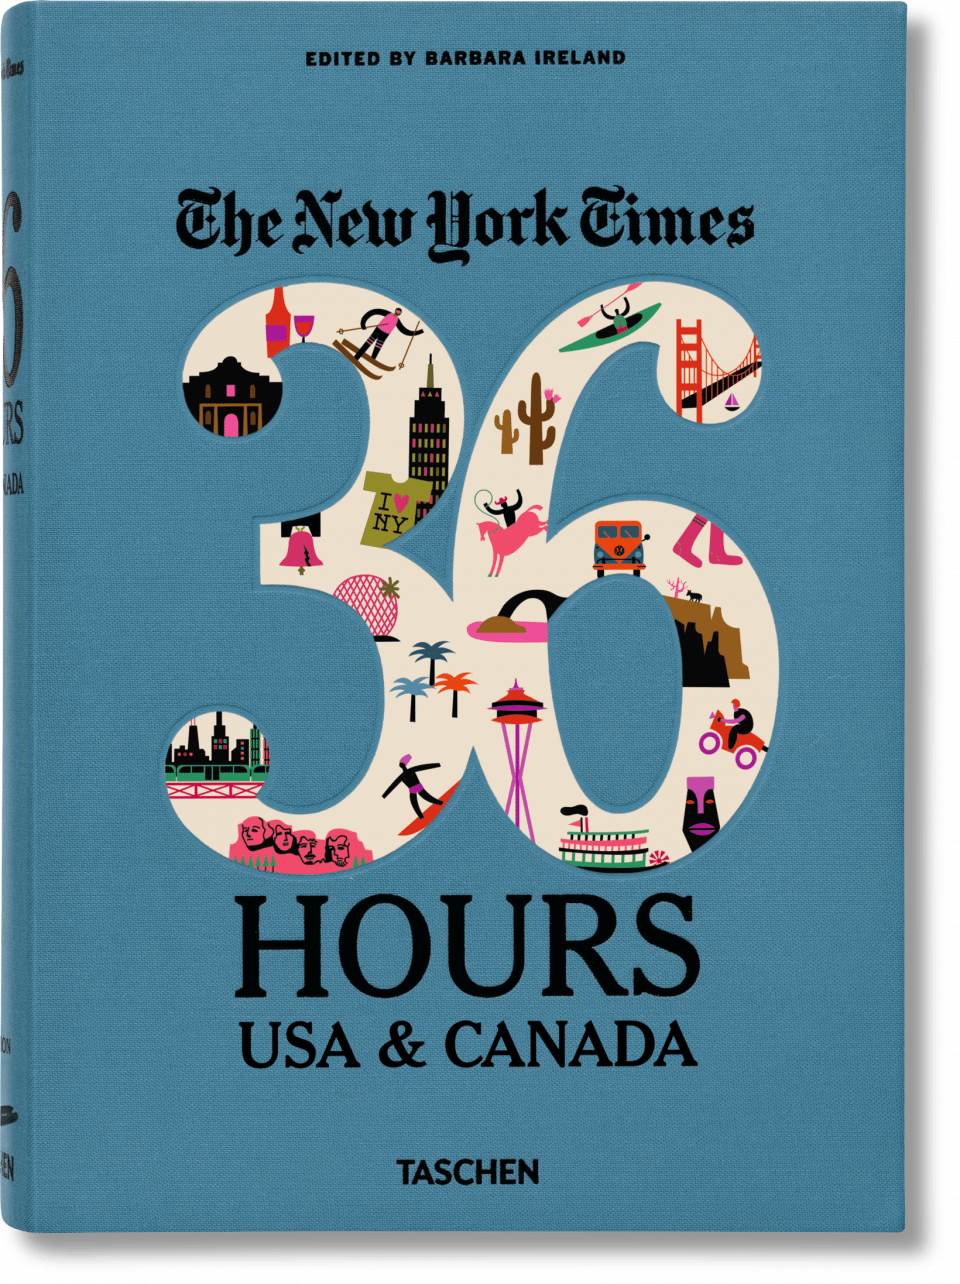 Ny Times 36 Hours in US and Canada book on white